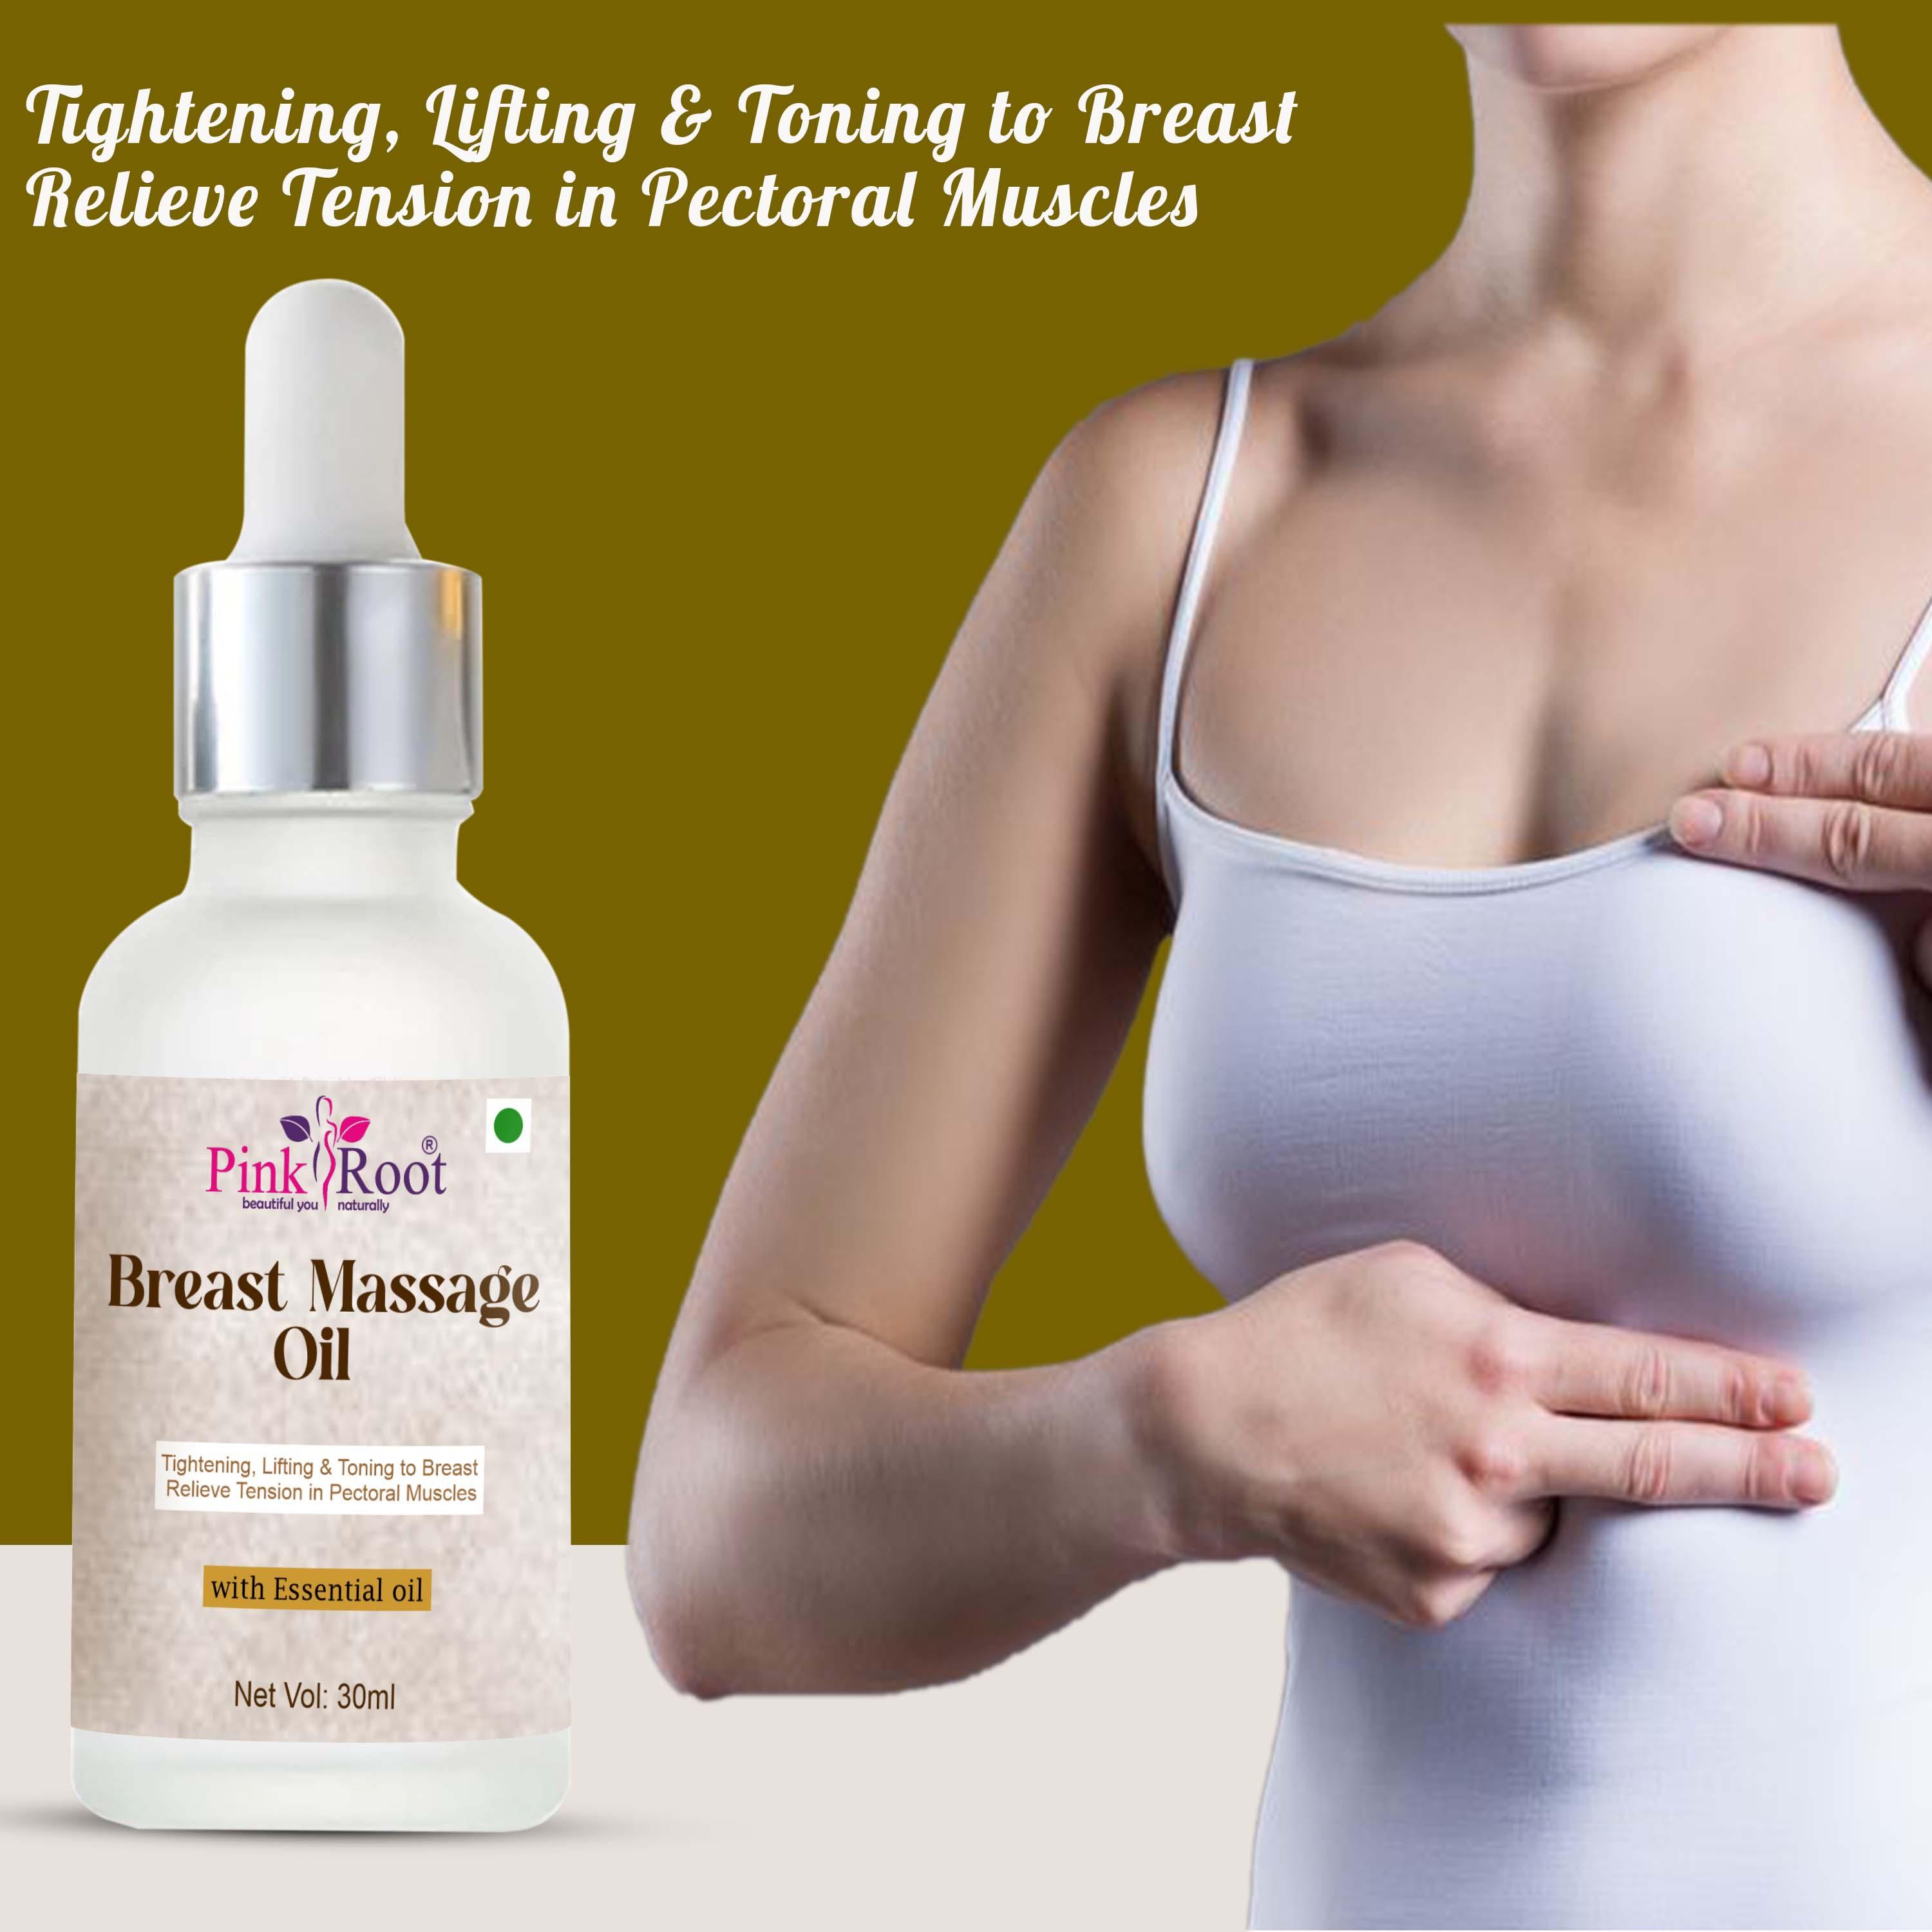 Pink Root Breast Toning & Firming Oil 30ml, Helps firm and tone tissue, prevent sagging and shape-up naturally - Pink Root